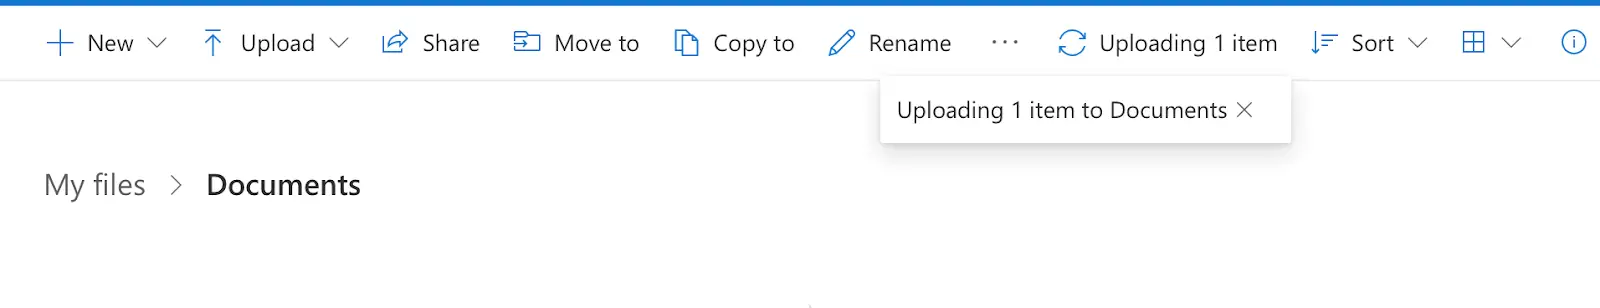 See Uploading the file in the same place atop of the page